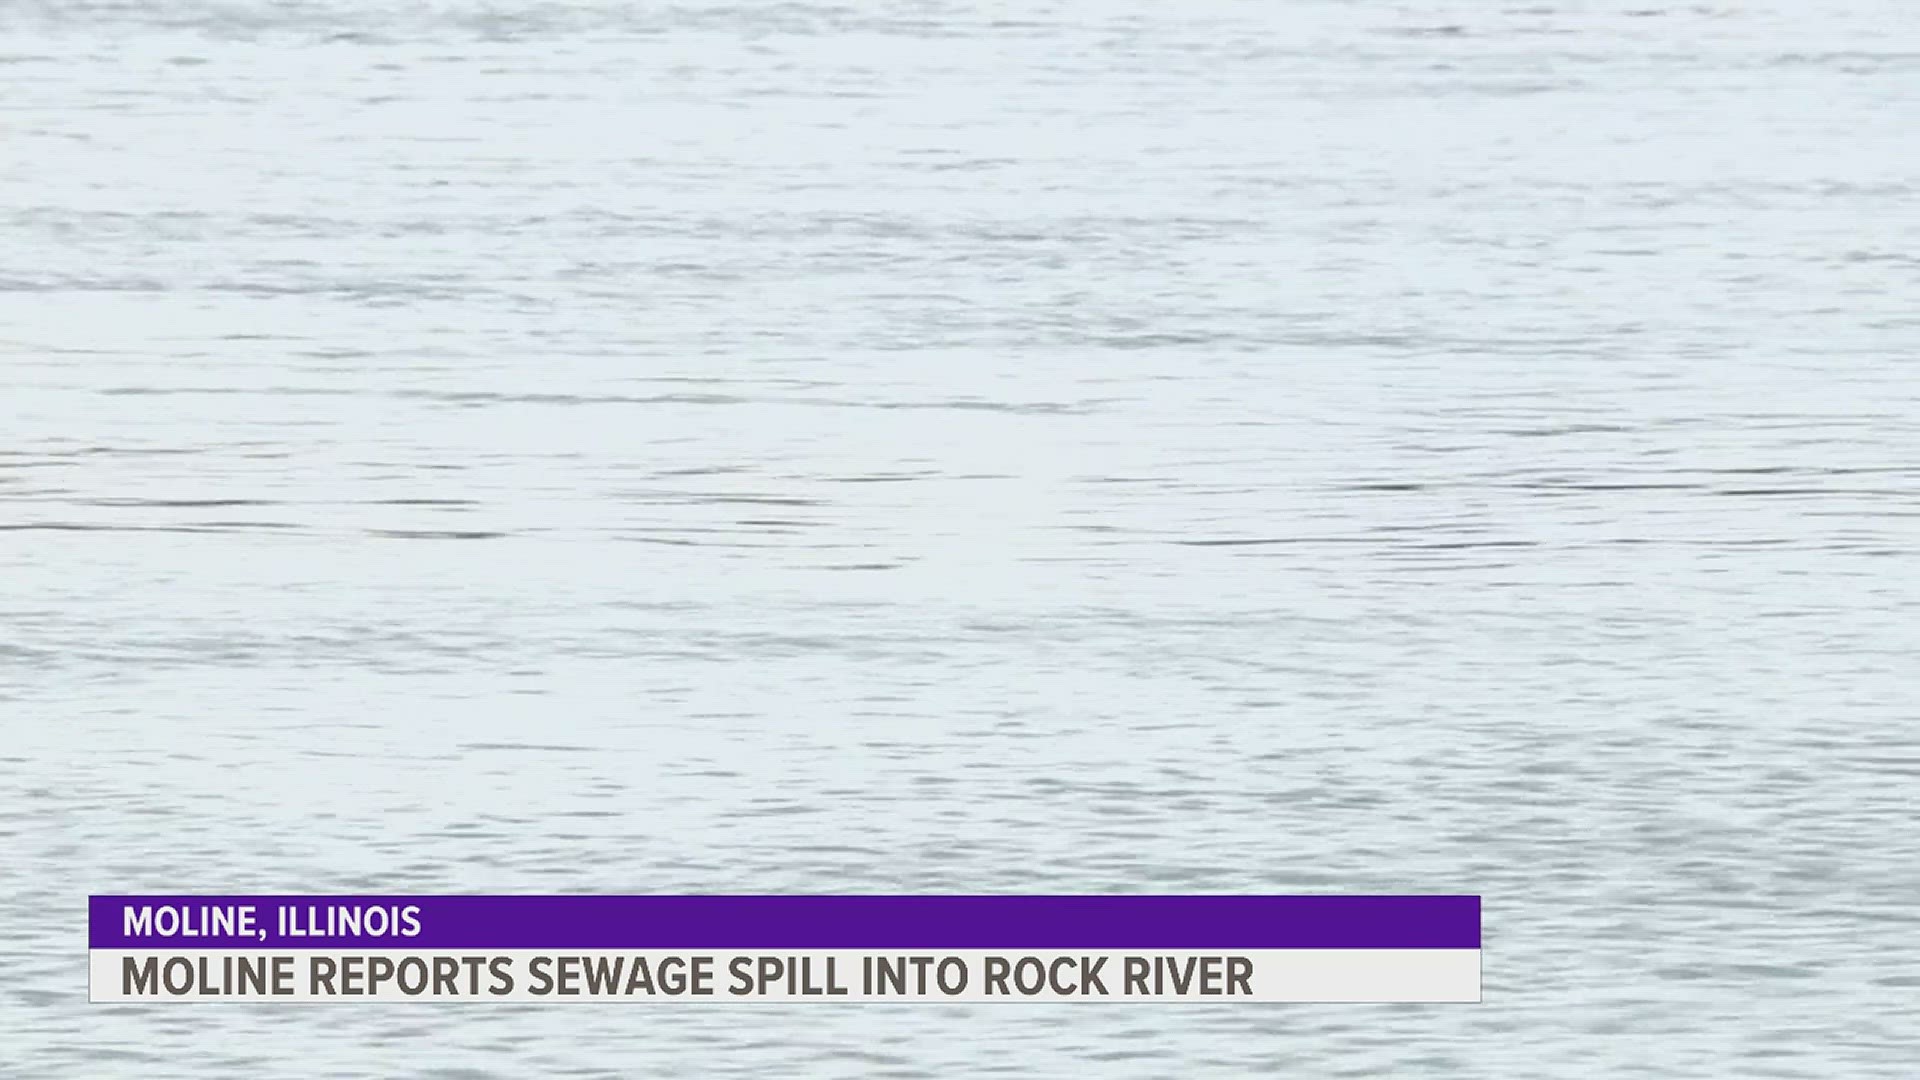 In an email to News 8, a city spokesperson said around 50,000 and 75,000 gallons of untreated water "was released into a ditch that runs into the Rock River."